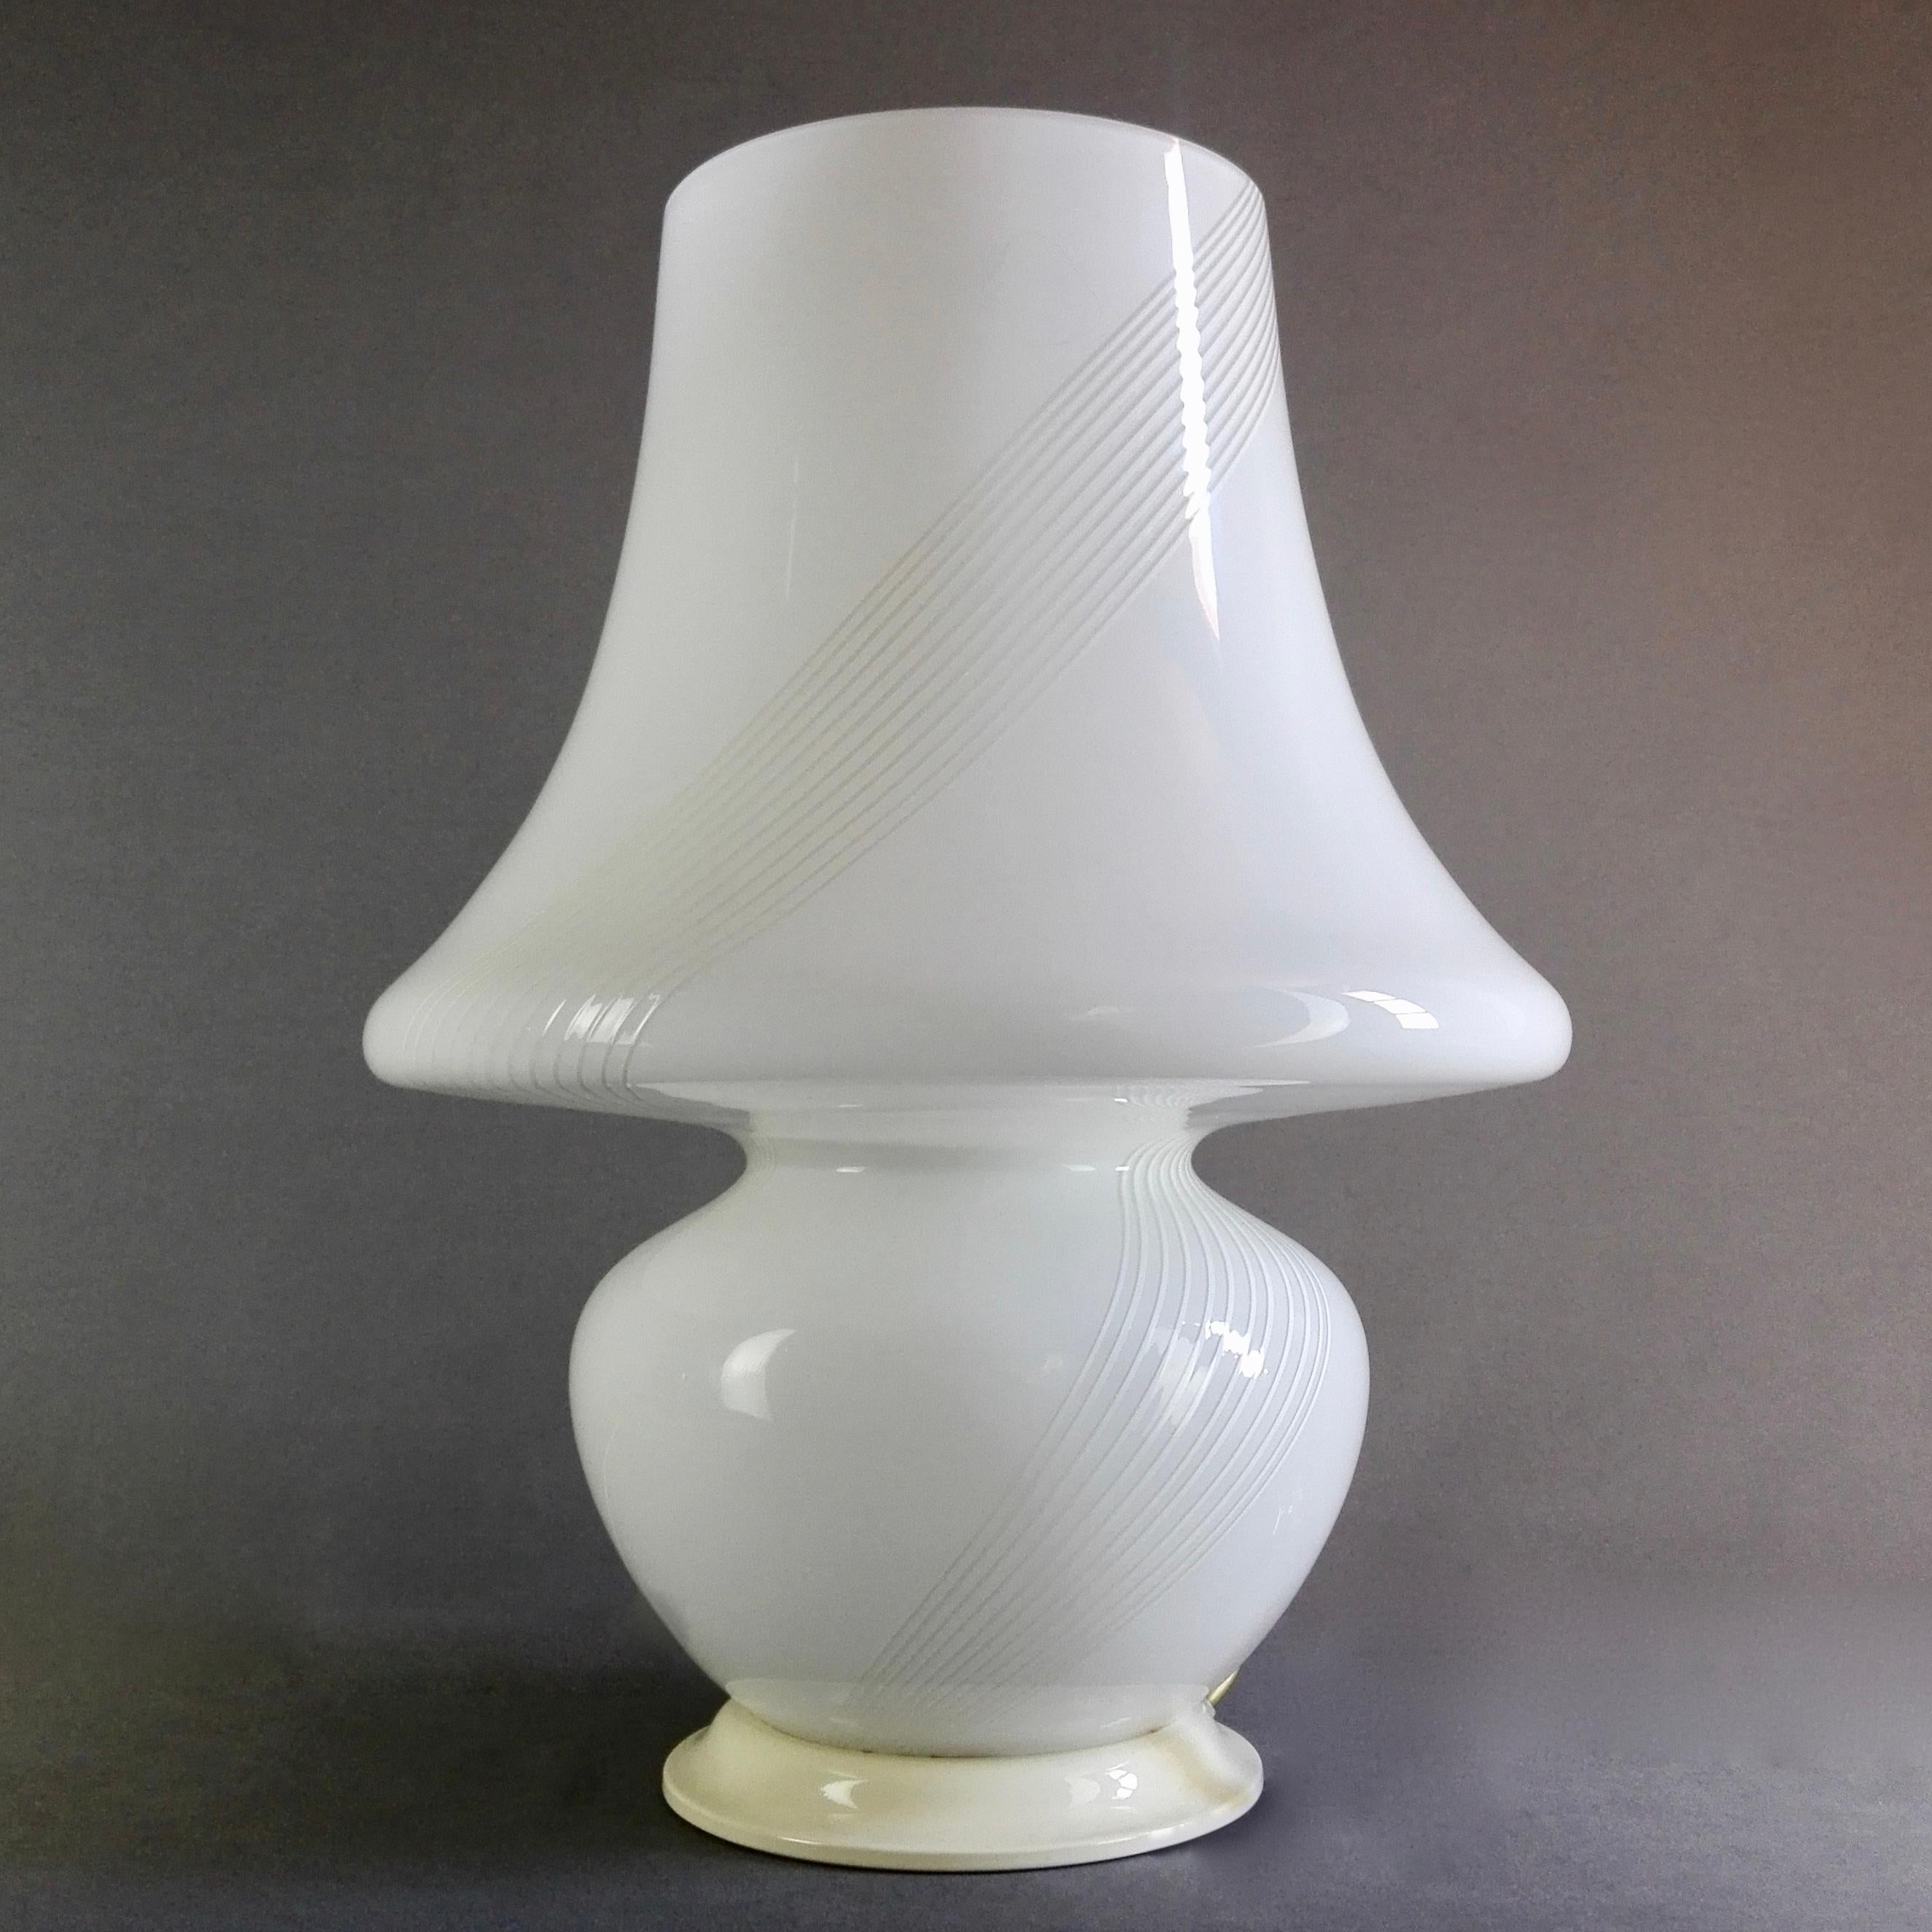 A fine and rare Italian hand blown Murano Mushroom glass table lamp from the 1960s. The light consists of an ivory lacquered metal base and an elegant hand-blown cased glass with tone-on-tone stripes creating a spiral pattern.

There's no trademark